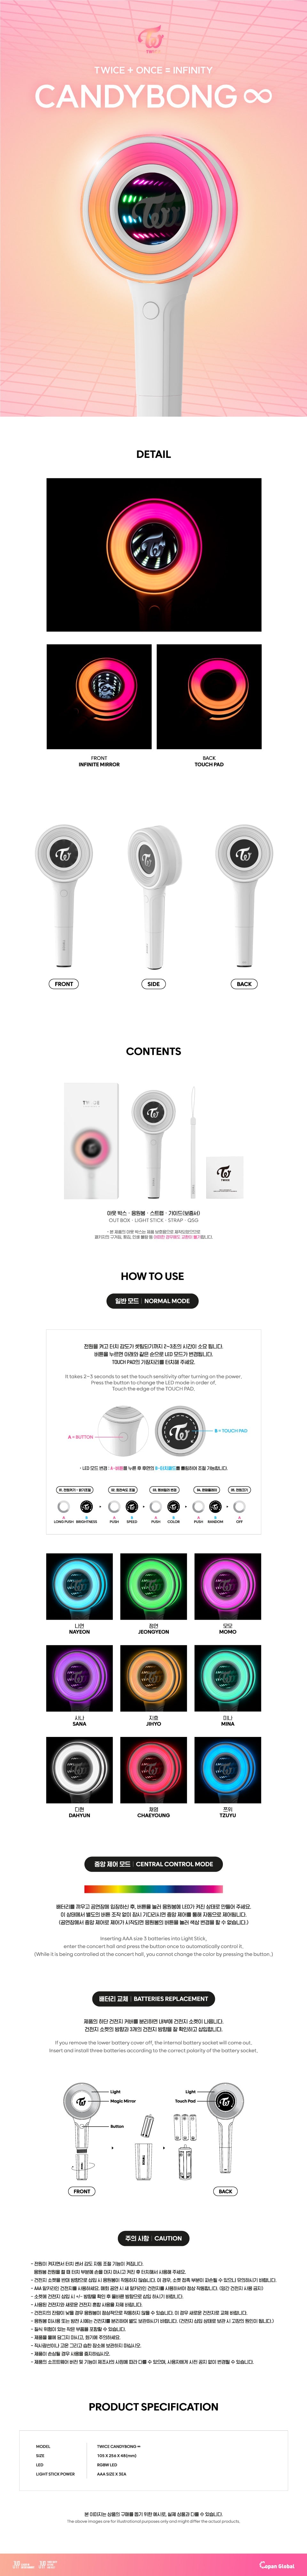 [PRE-ORDER] TWICE Official Lightstick (CANDYBONG ∞)